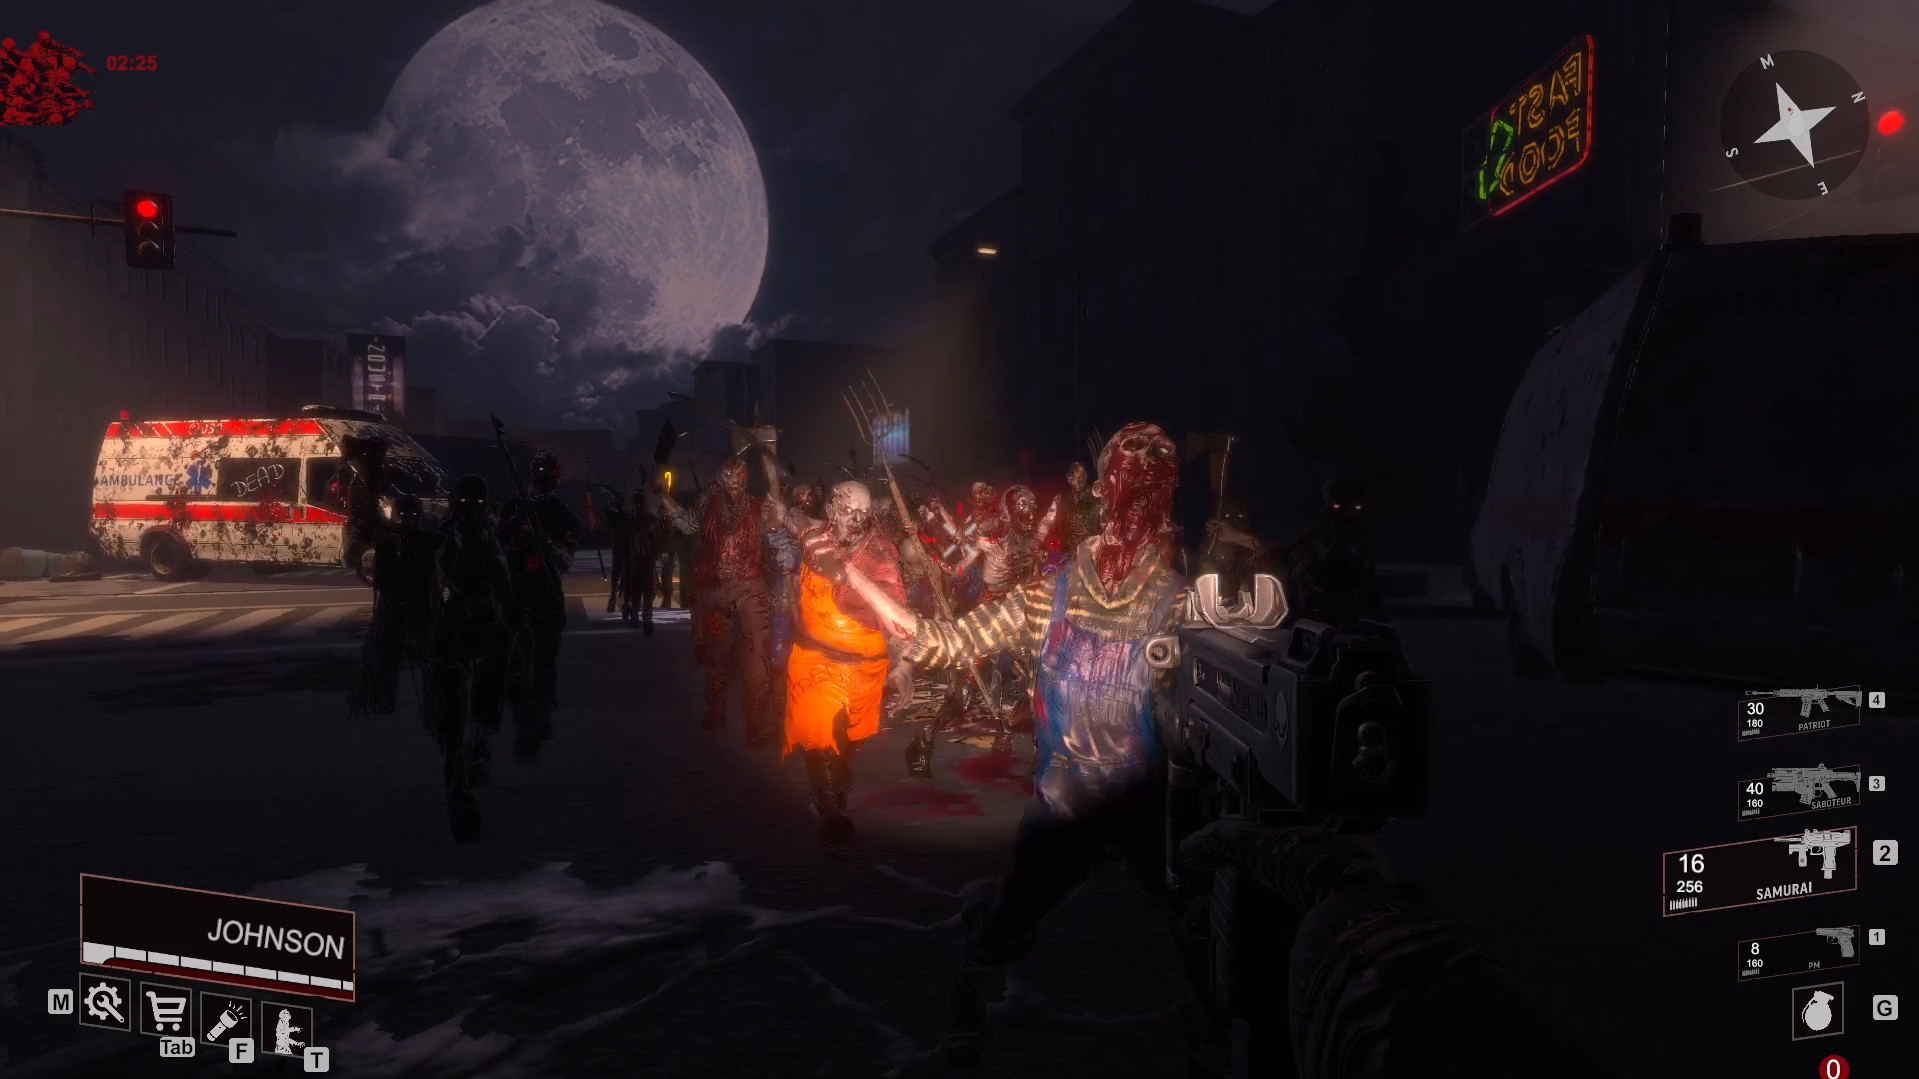 Blood And Zombies Free Download